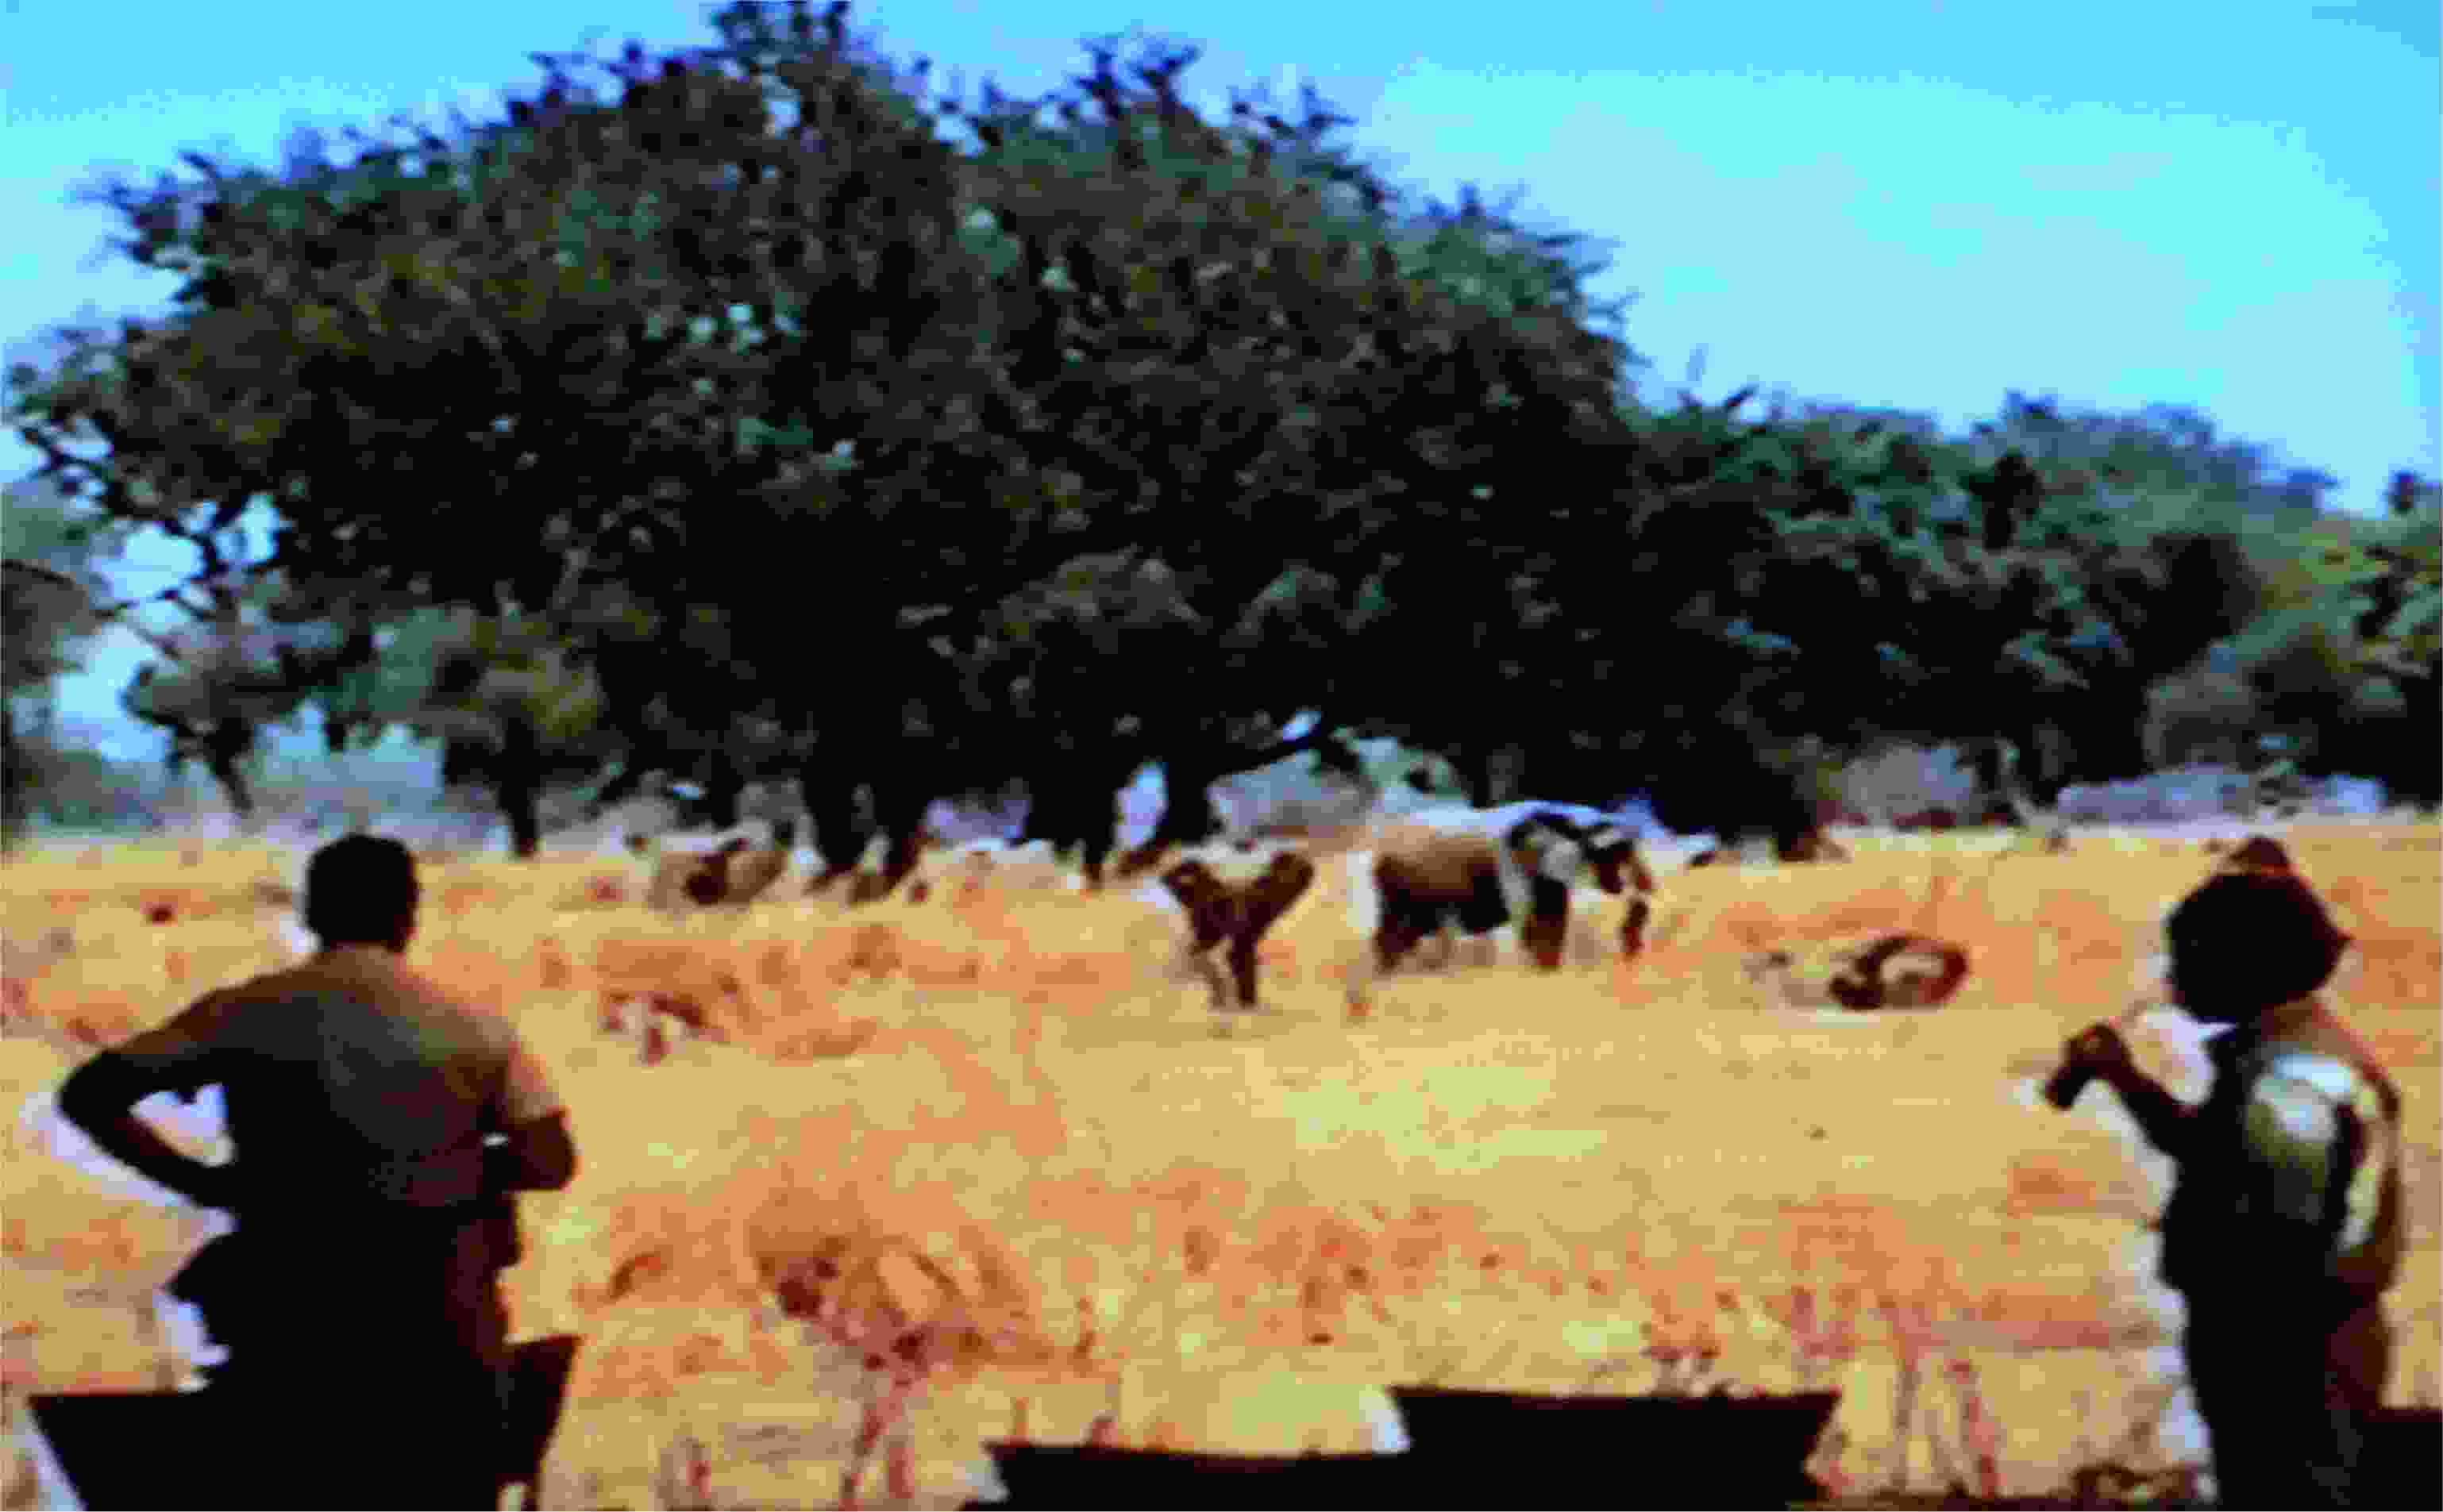 On foot, we tracked two lions for maybe a quarter mile.  As we got near, they strolled away from us, finally settling in the shade of a big tree.  Photo from video by FG.